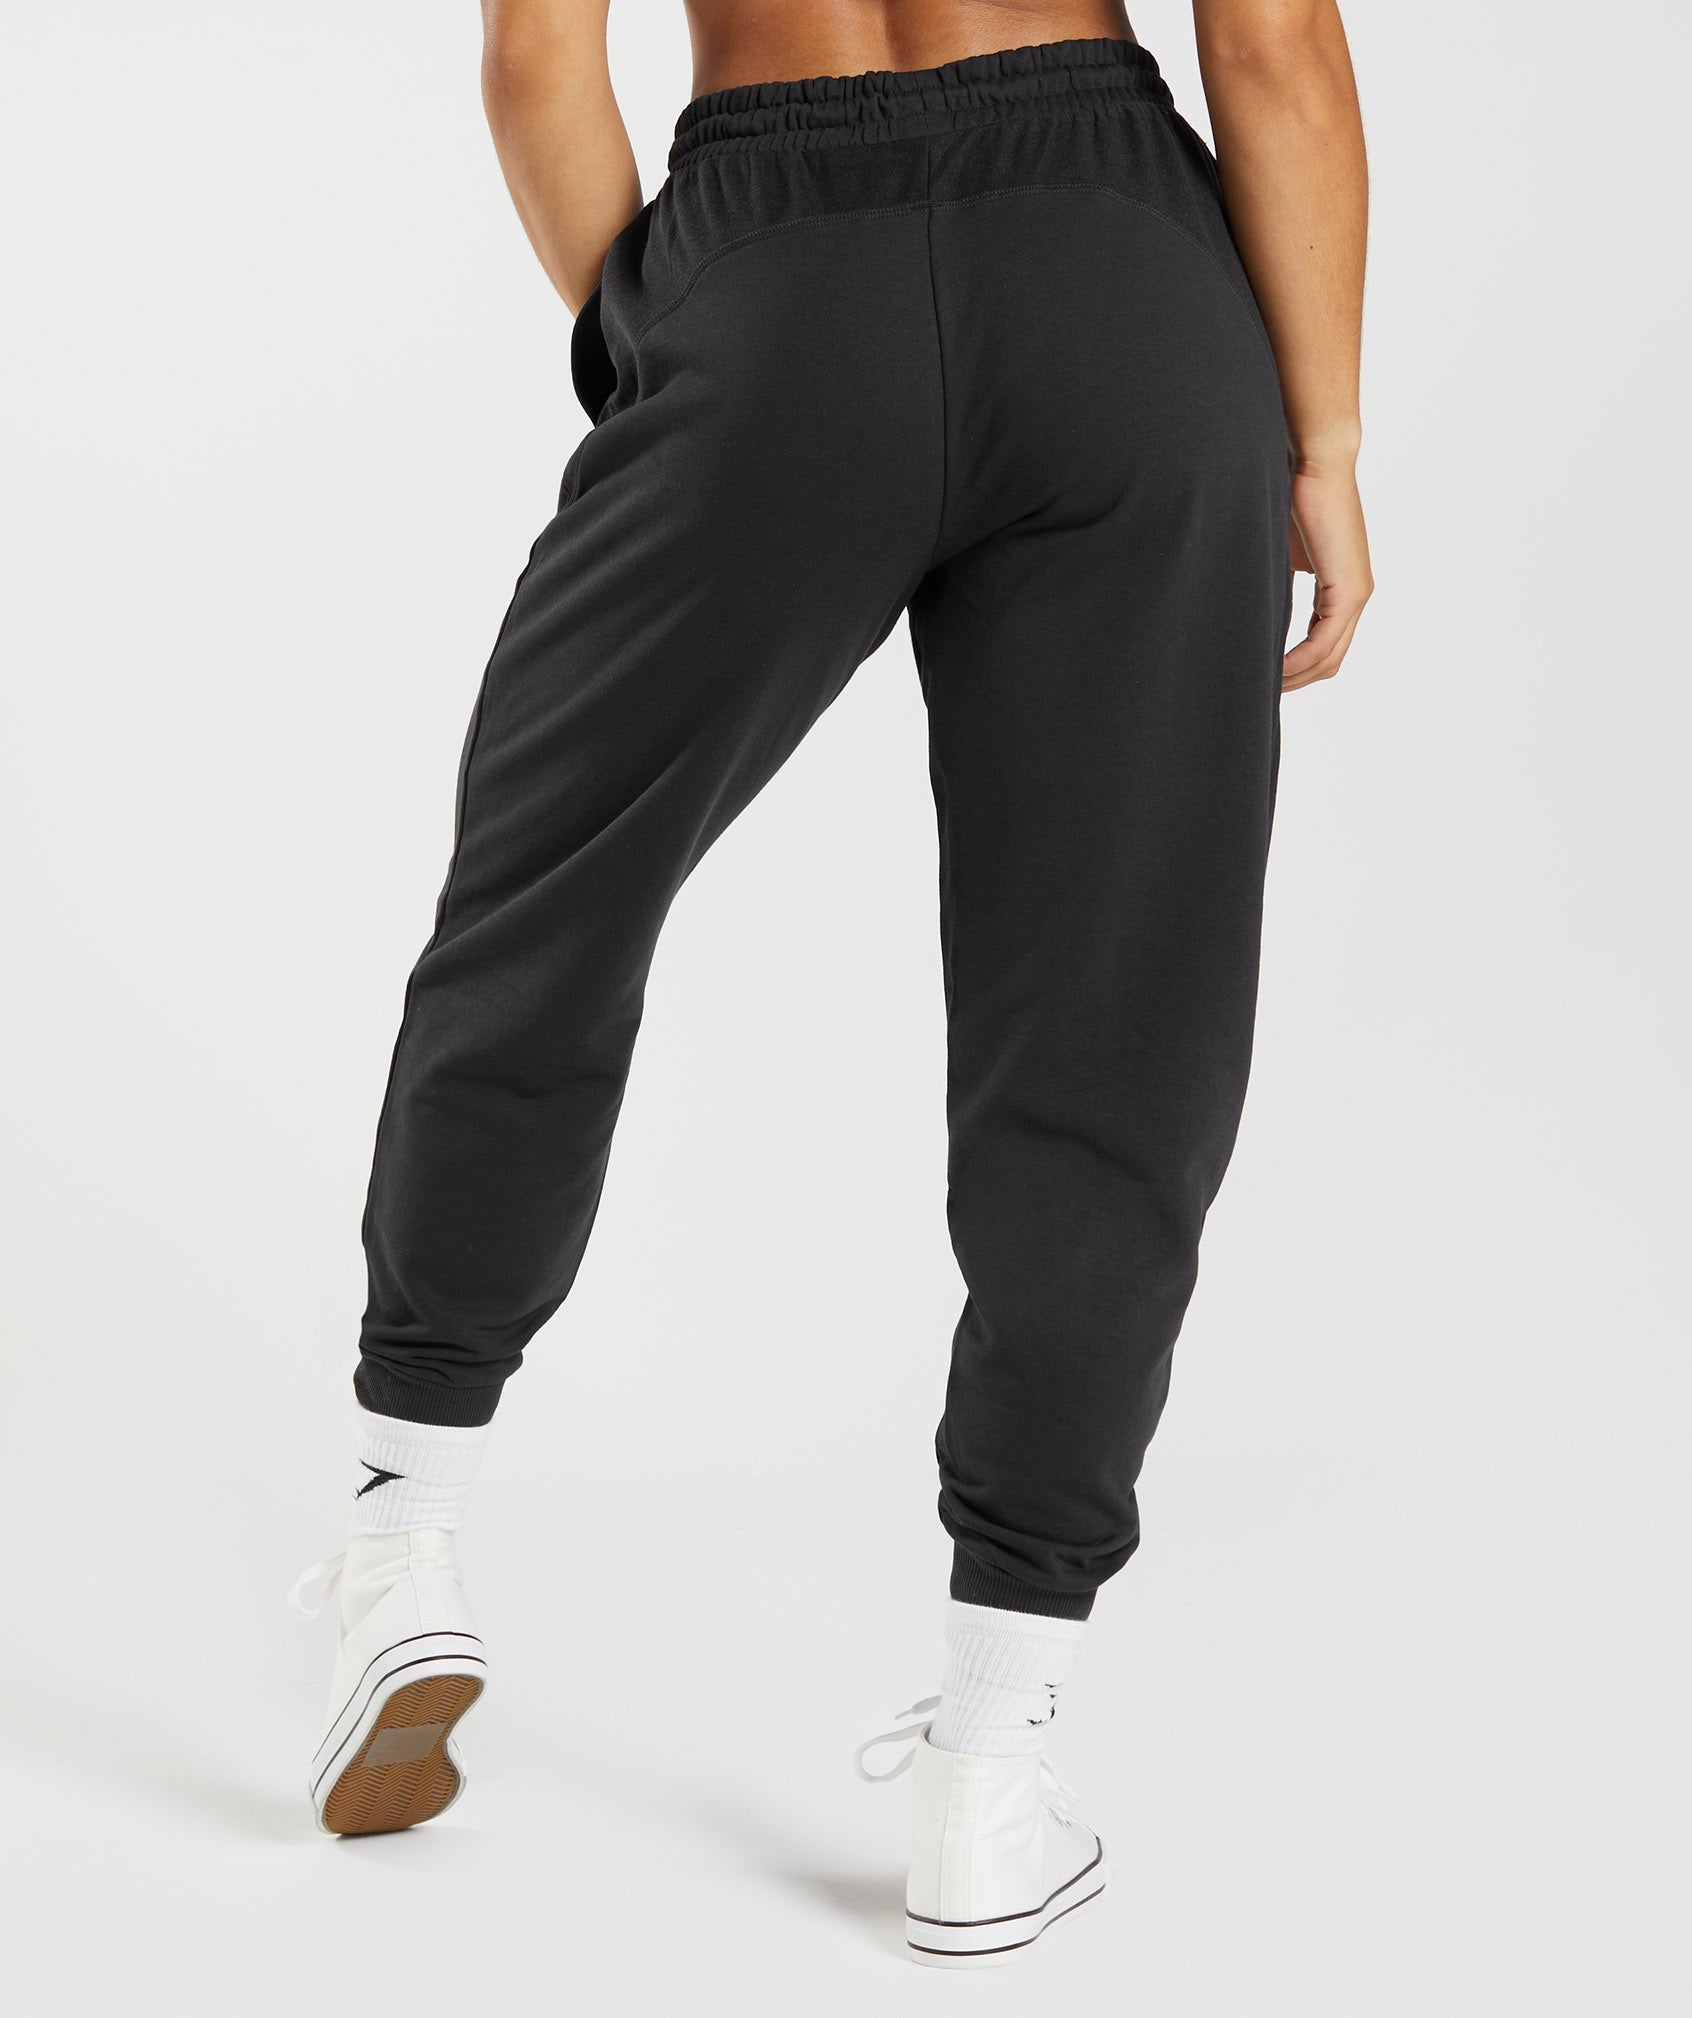 GS Power Joggers